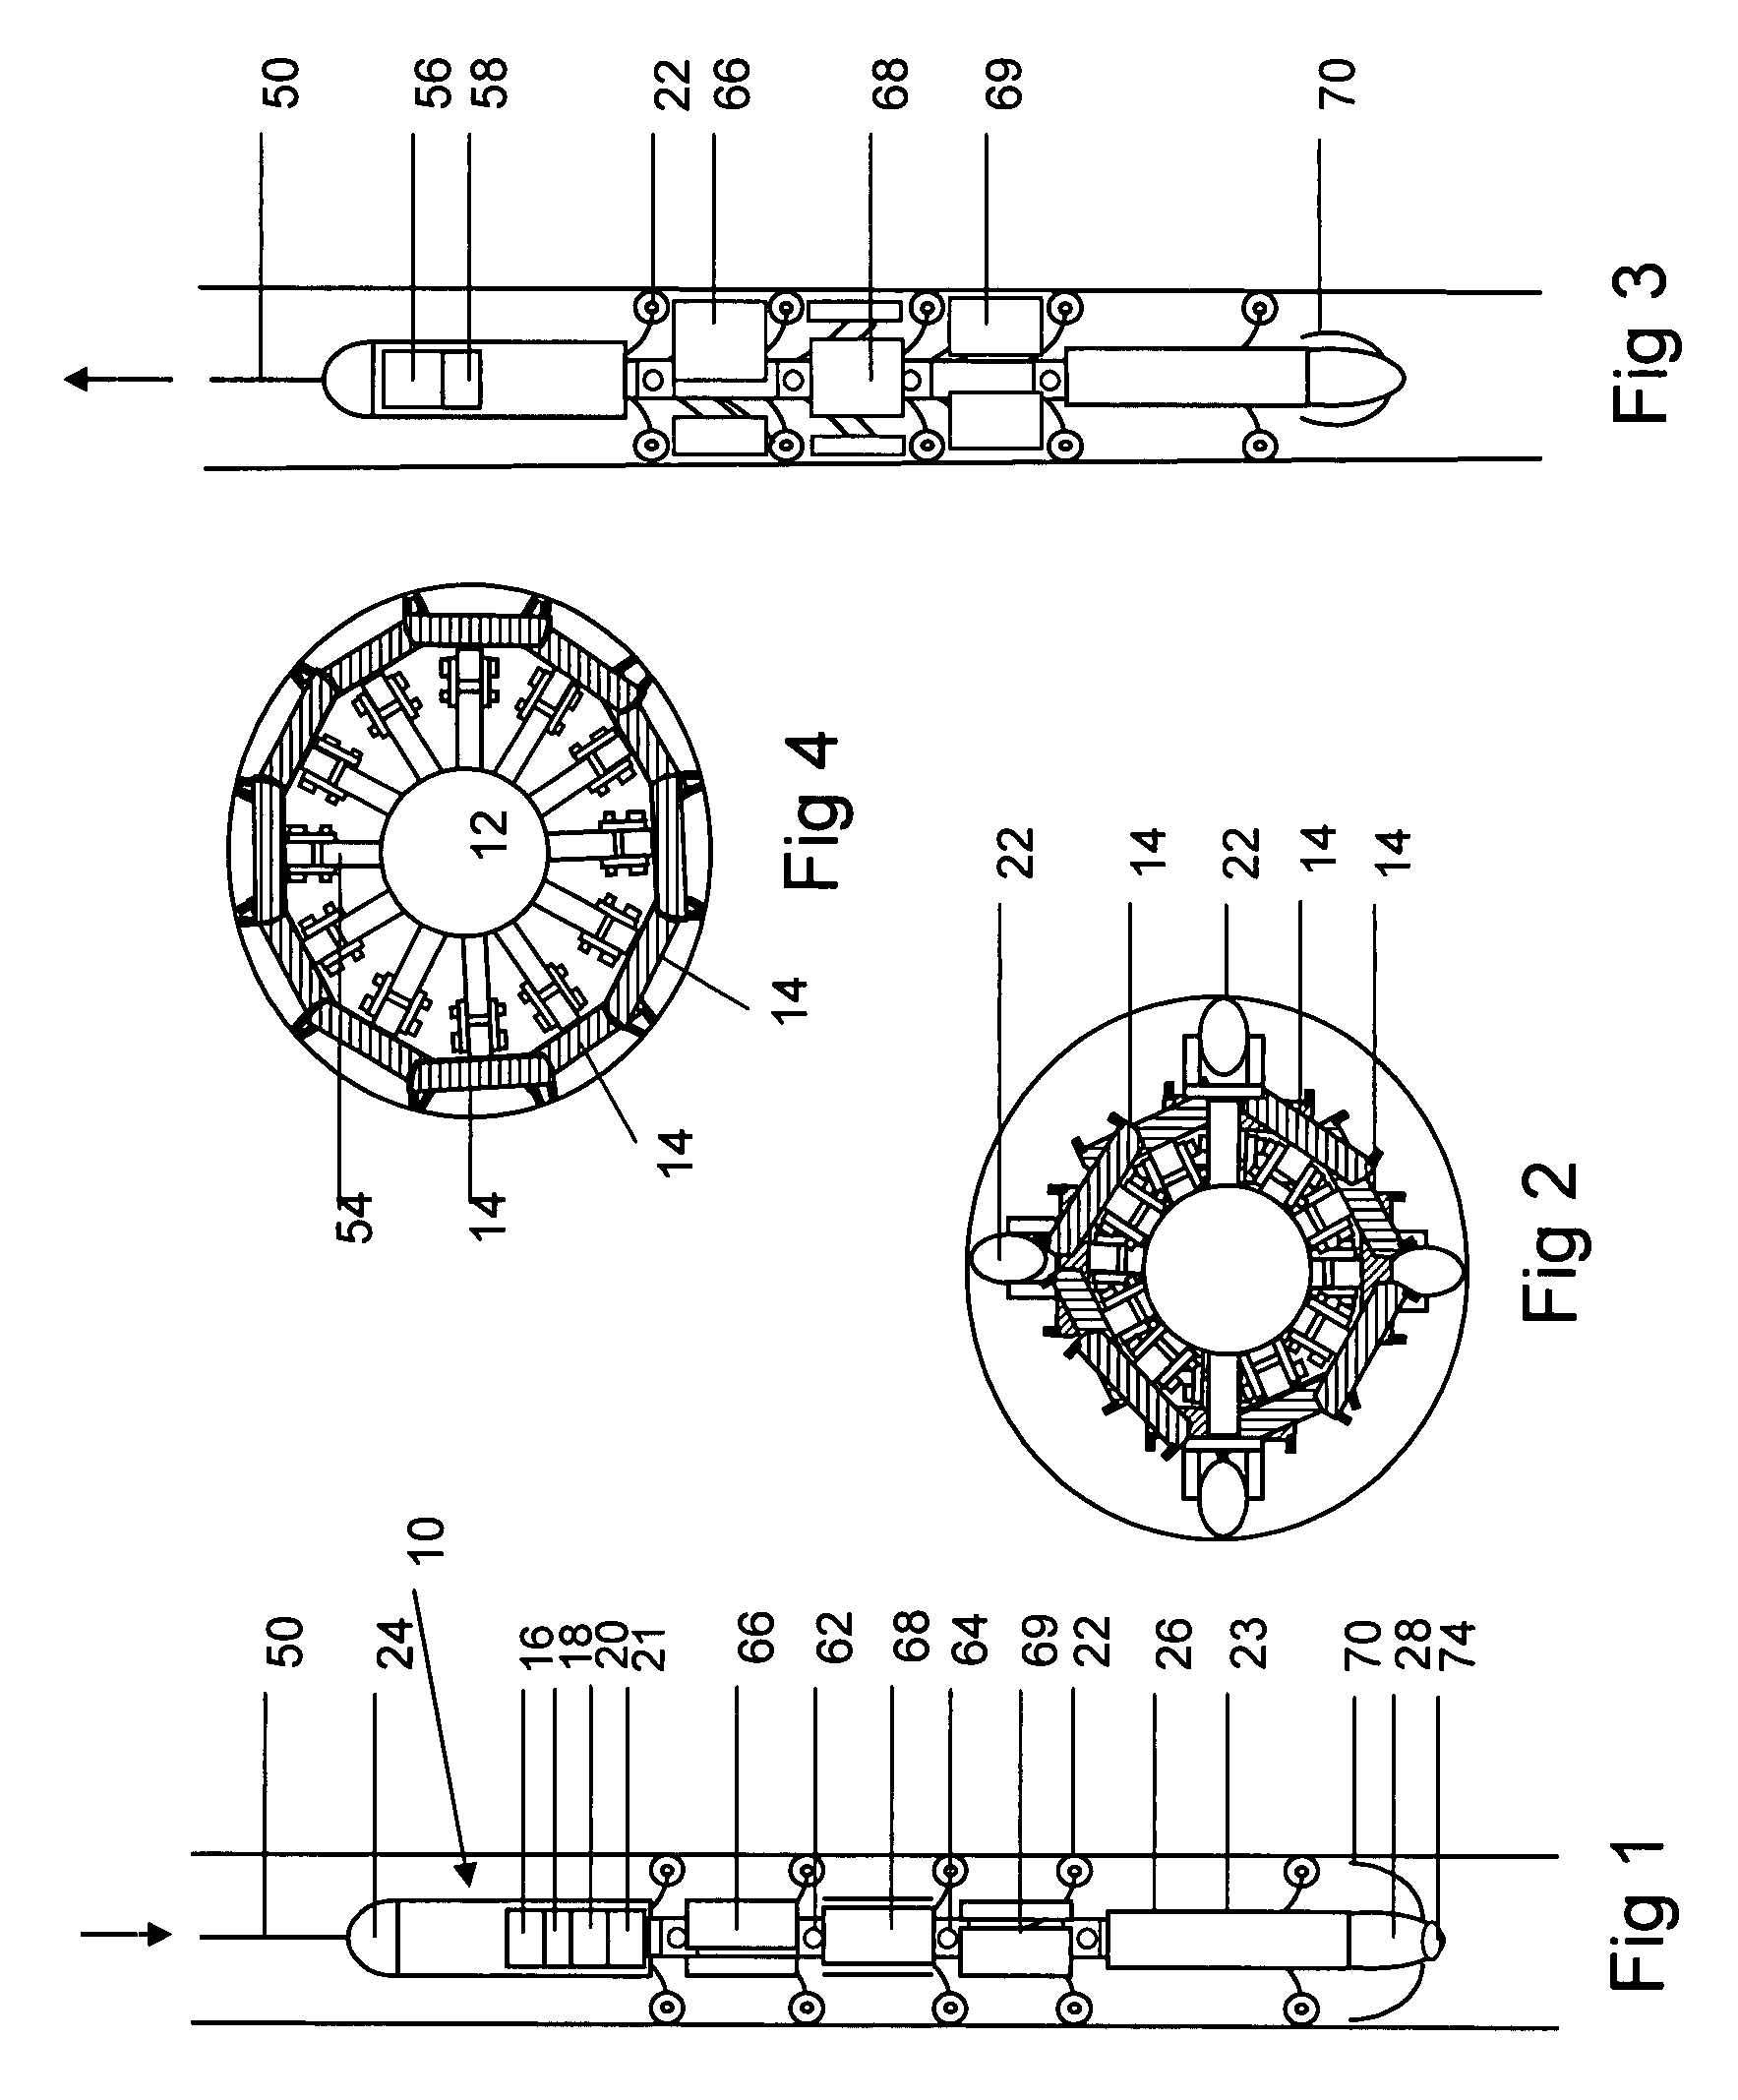 Method and apparatus for detecting defects in oilfield tubulars